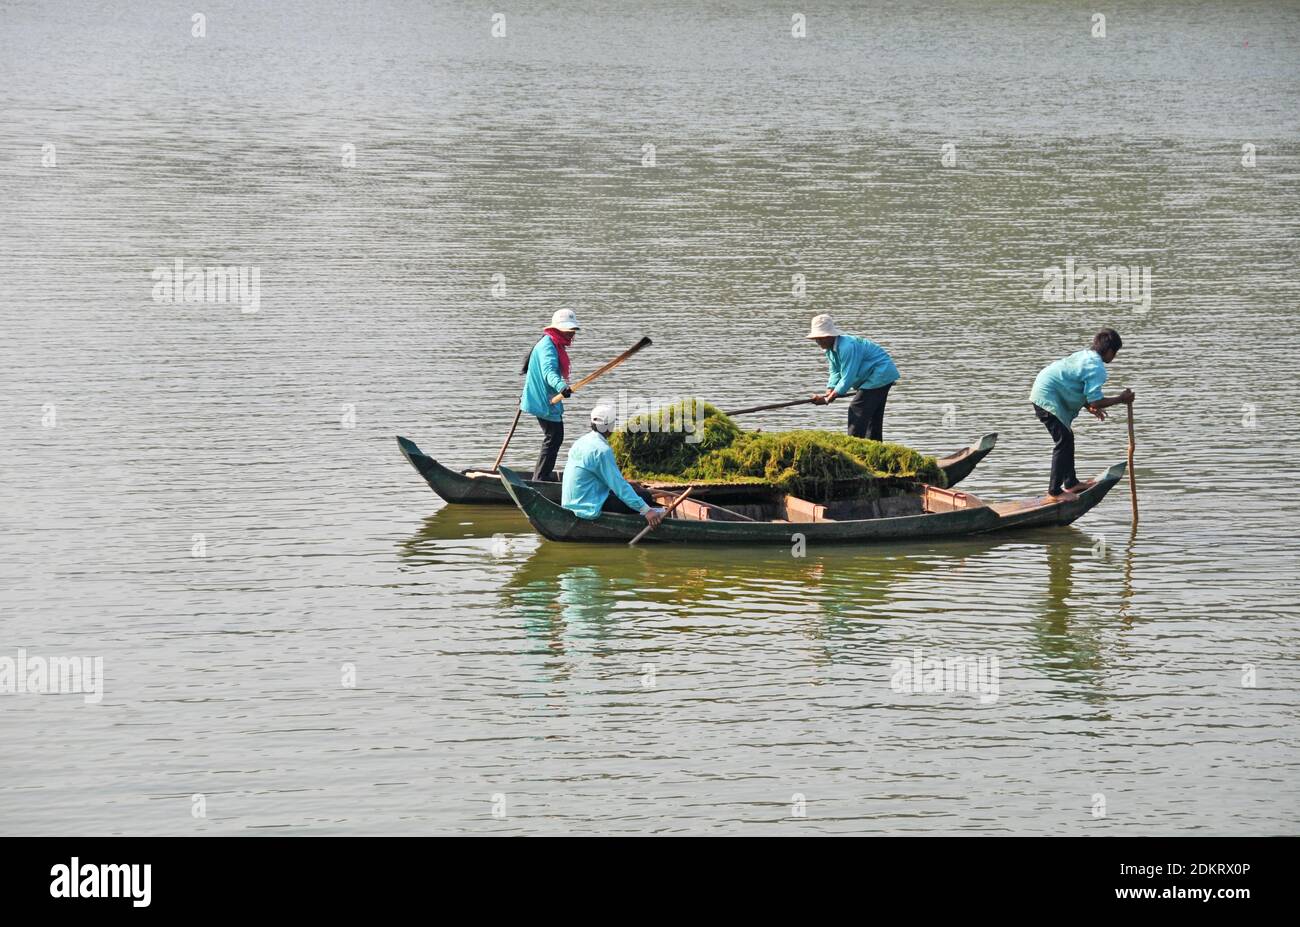 people working on a boat, Angkor Vat, Siem Reap, Cambodia Stock Photo